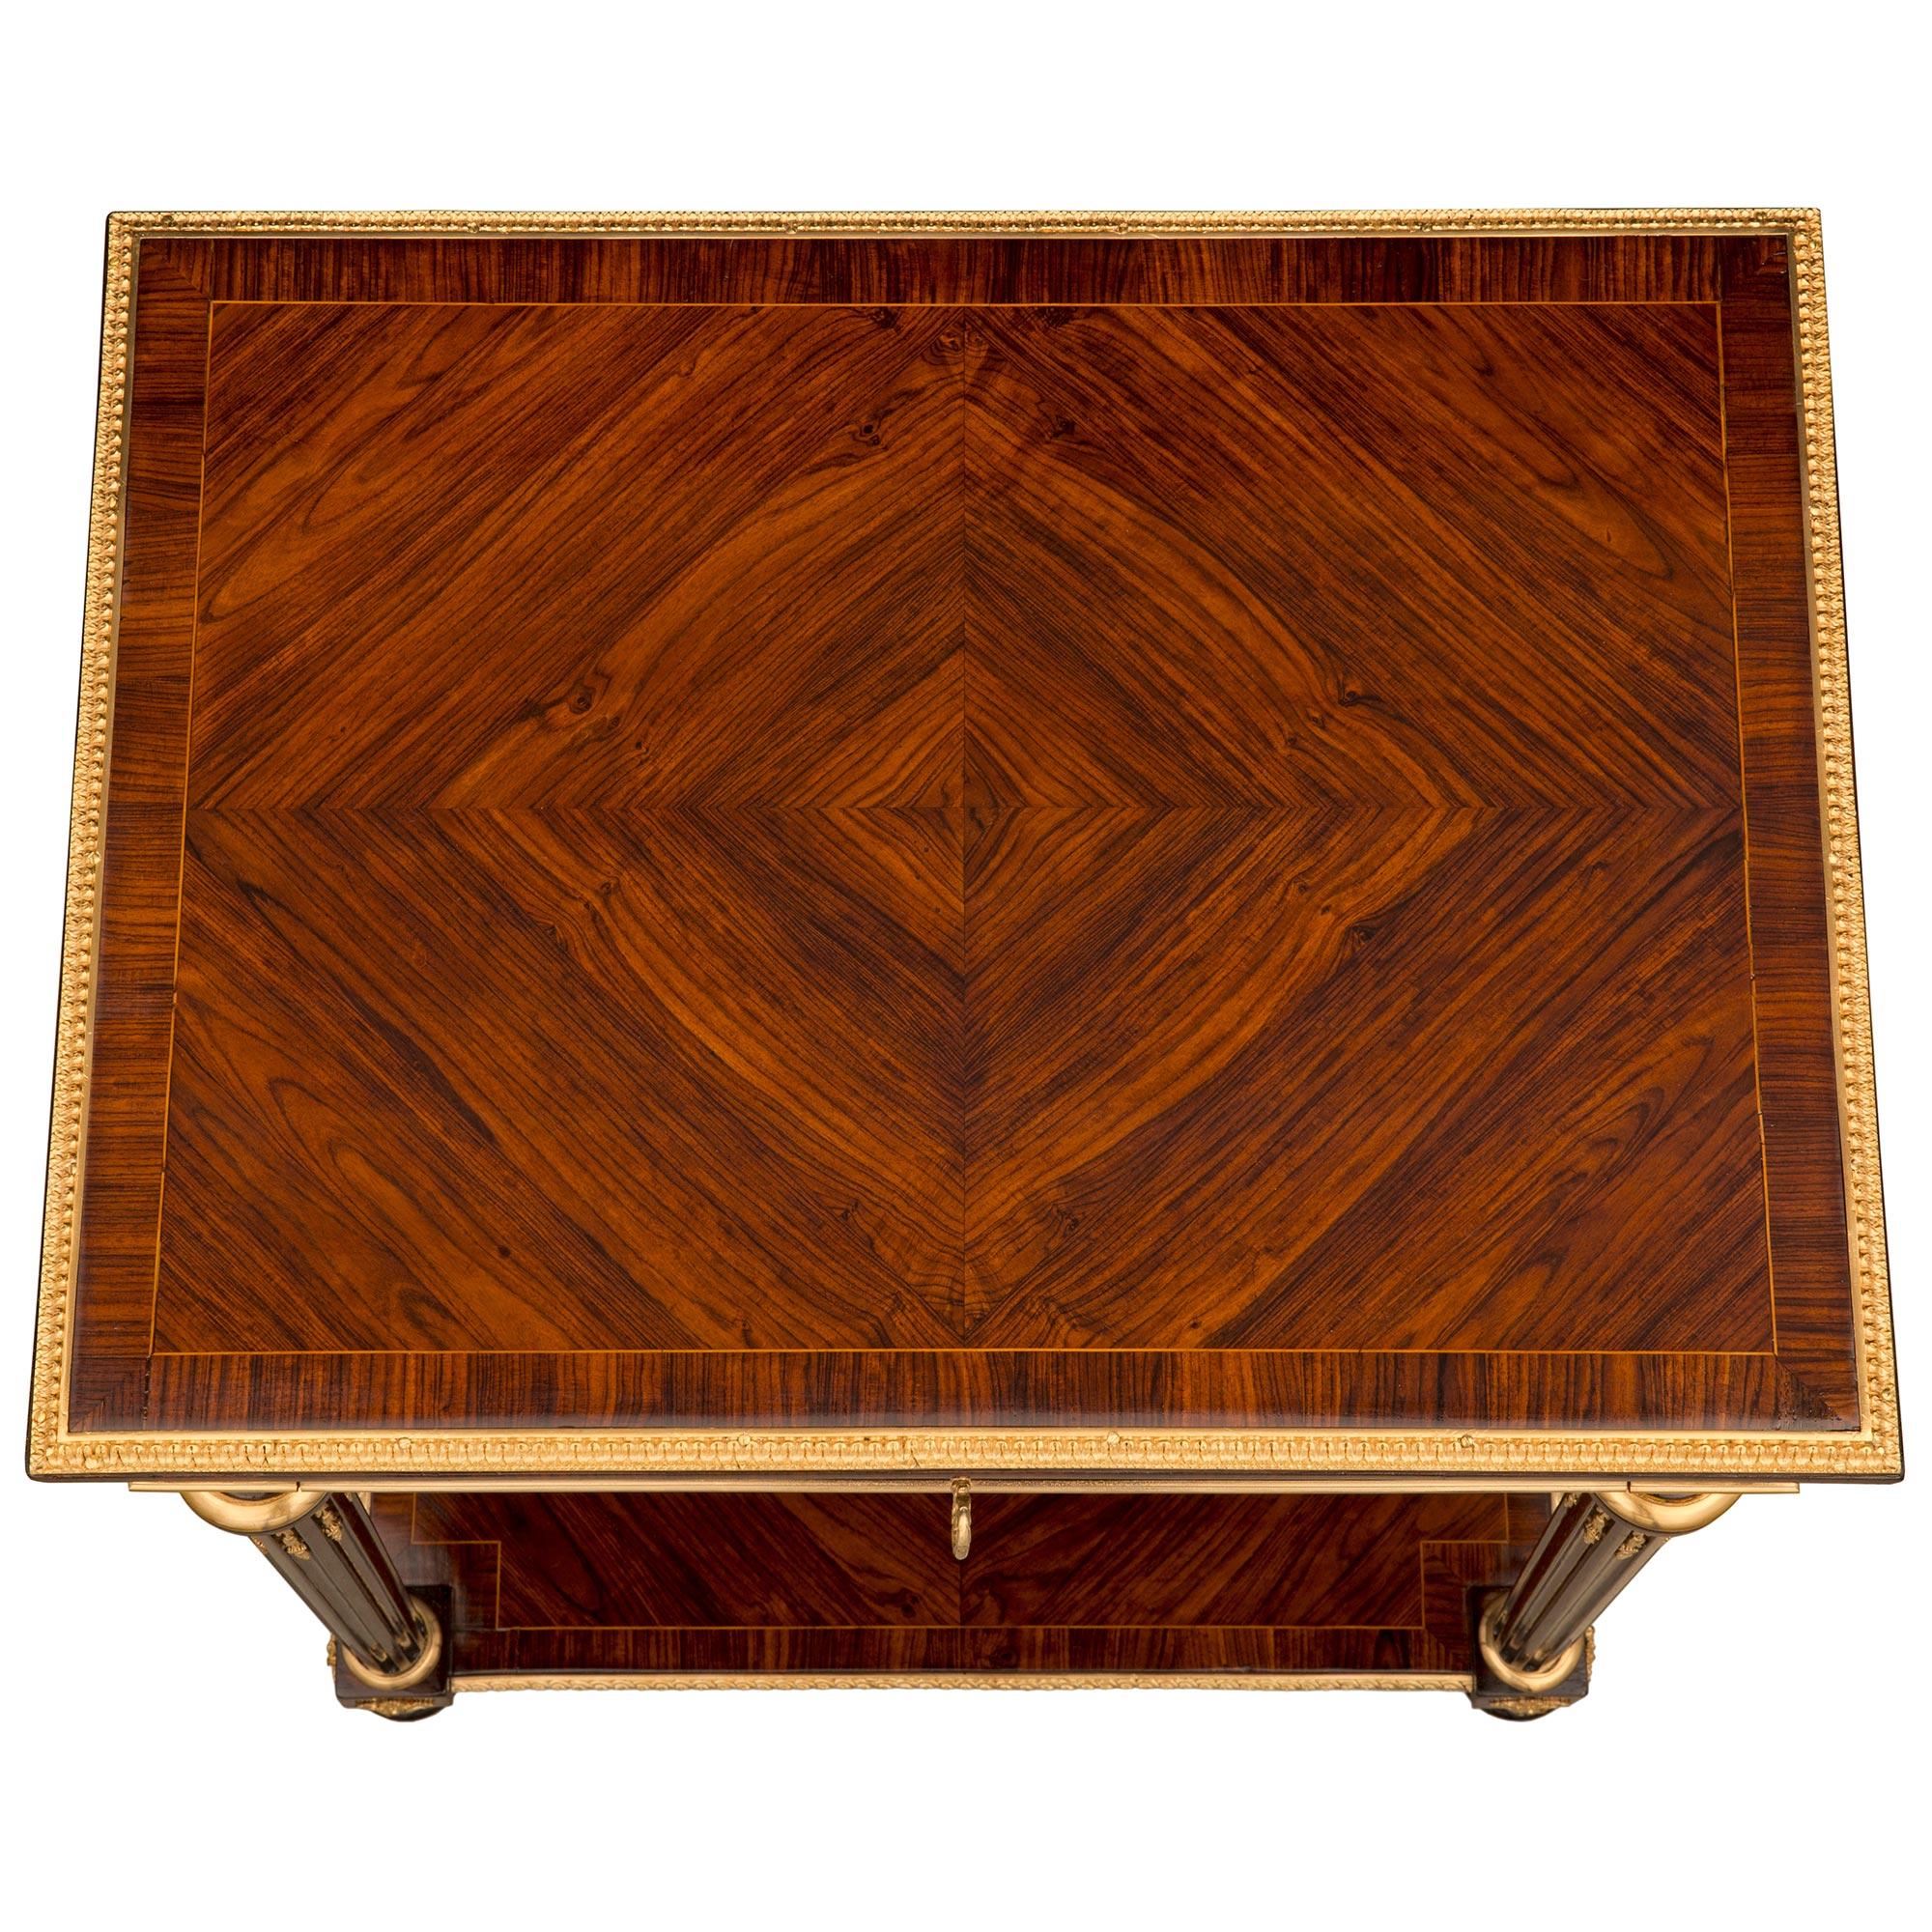 A stunning and extremely high quality French 19th century Louis XVI st. Mahogany, Rosewood, and ormolu side table attributed to Sormani. The table is raised by elegant topie shaped feet with fine fitted foliate ormolu sabots. Above the feet are